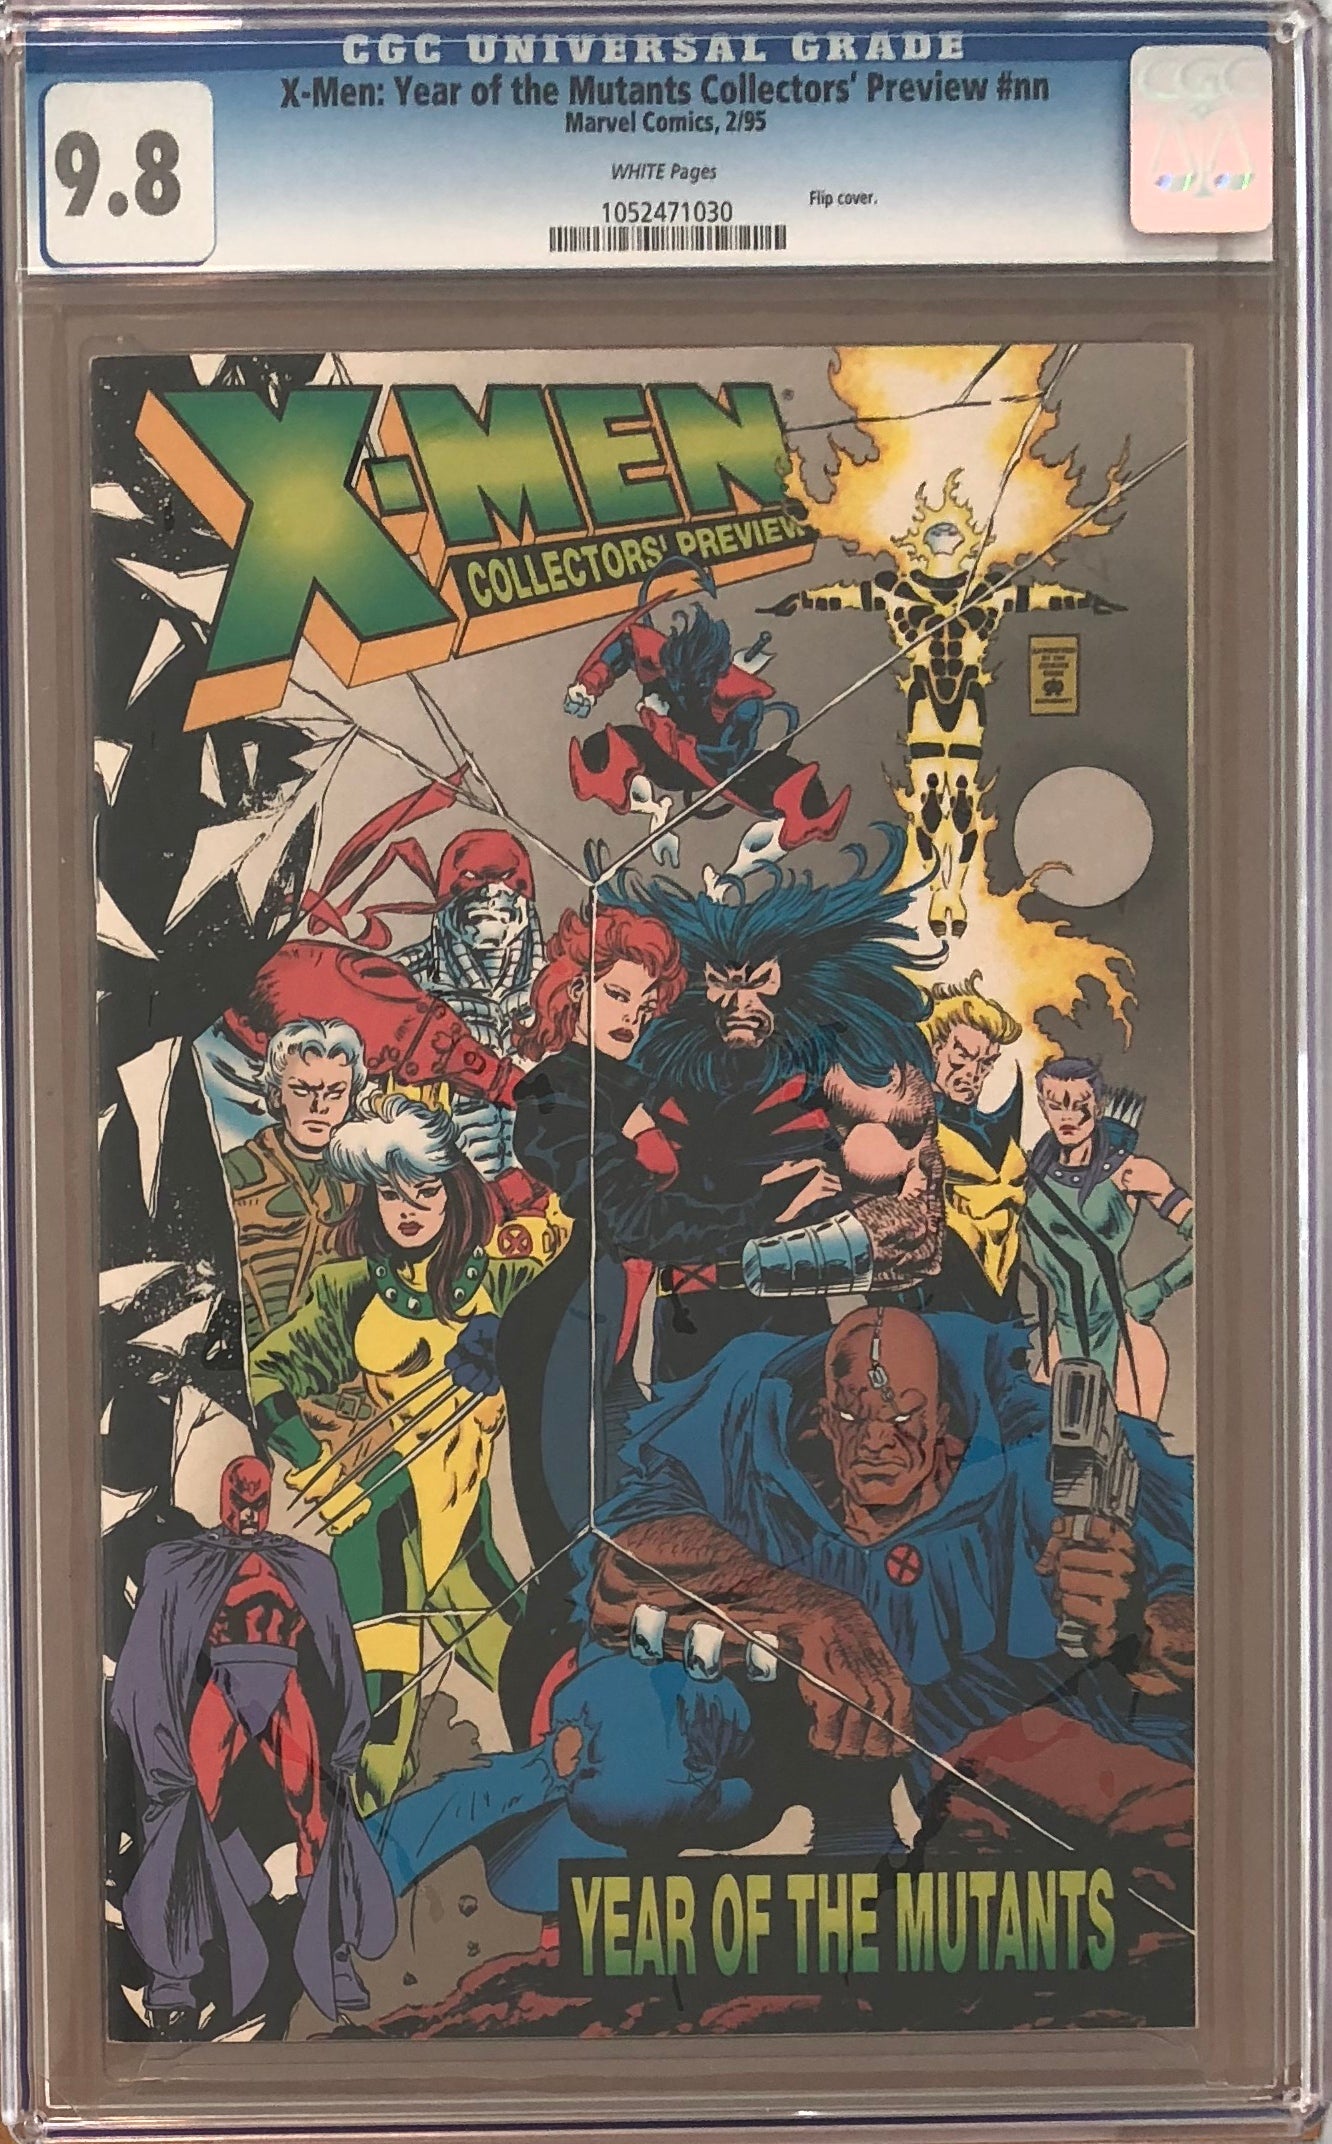 X-Men: Year of the Mutants Collectors' Preview #1 CGC 9.8